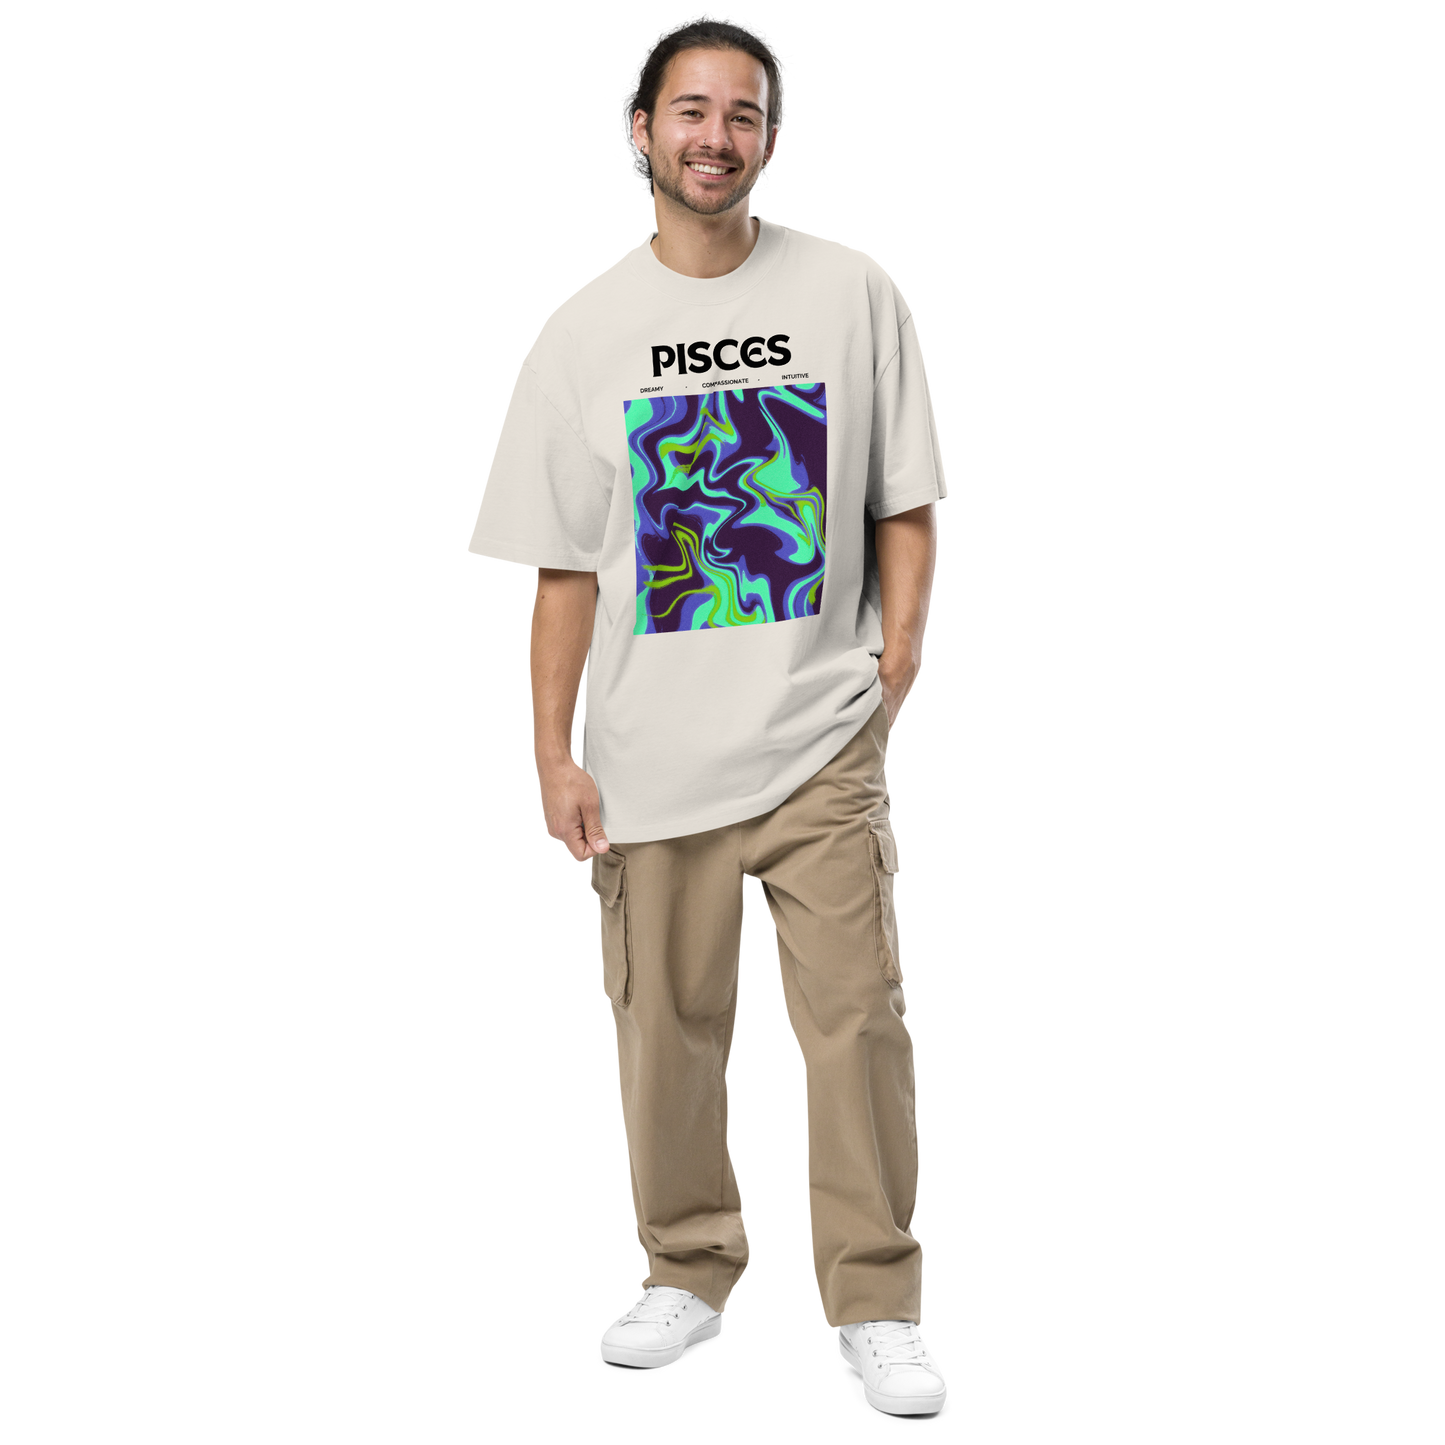 Man wearing a Faded Bone Pisces Oversized T-Shirt featuring an Abstract Pisces Star Sign graphic on the chest - Cool Graphic Zodiac Oversized Tees - Boozy Fox